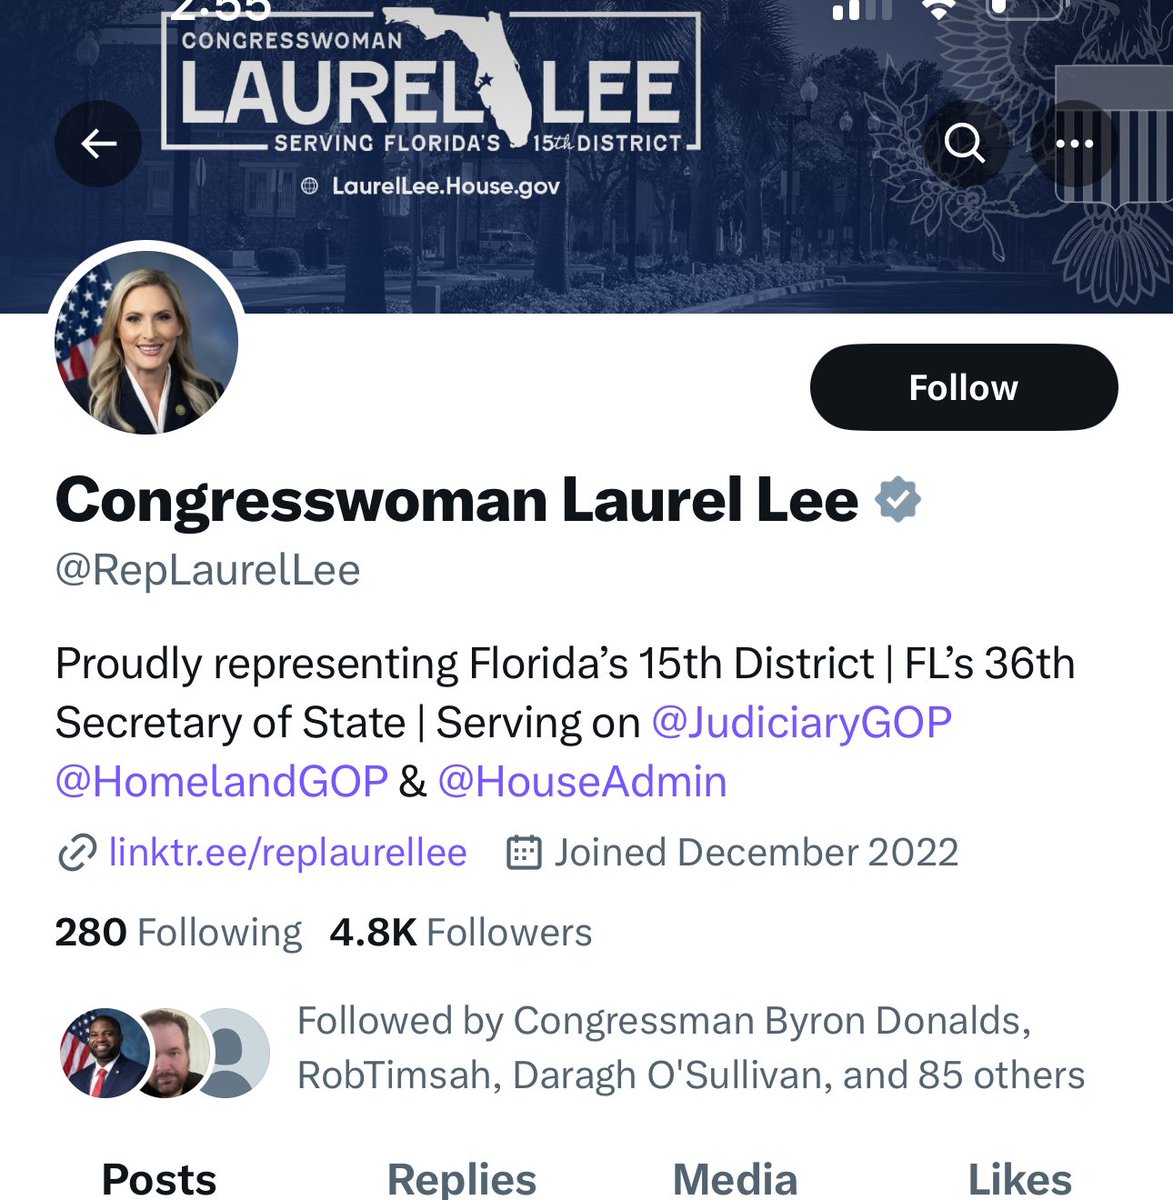 .@RepLaurelLee has 4.8k followers on X. I already have the oppo file on her. Trump wants her gone. Should I run for Congress, or should I remain an outsider? Laurel Lee is a vulnerable Republican and I have Name ID and major fundraising prowess in FL. What do you think?